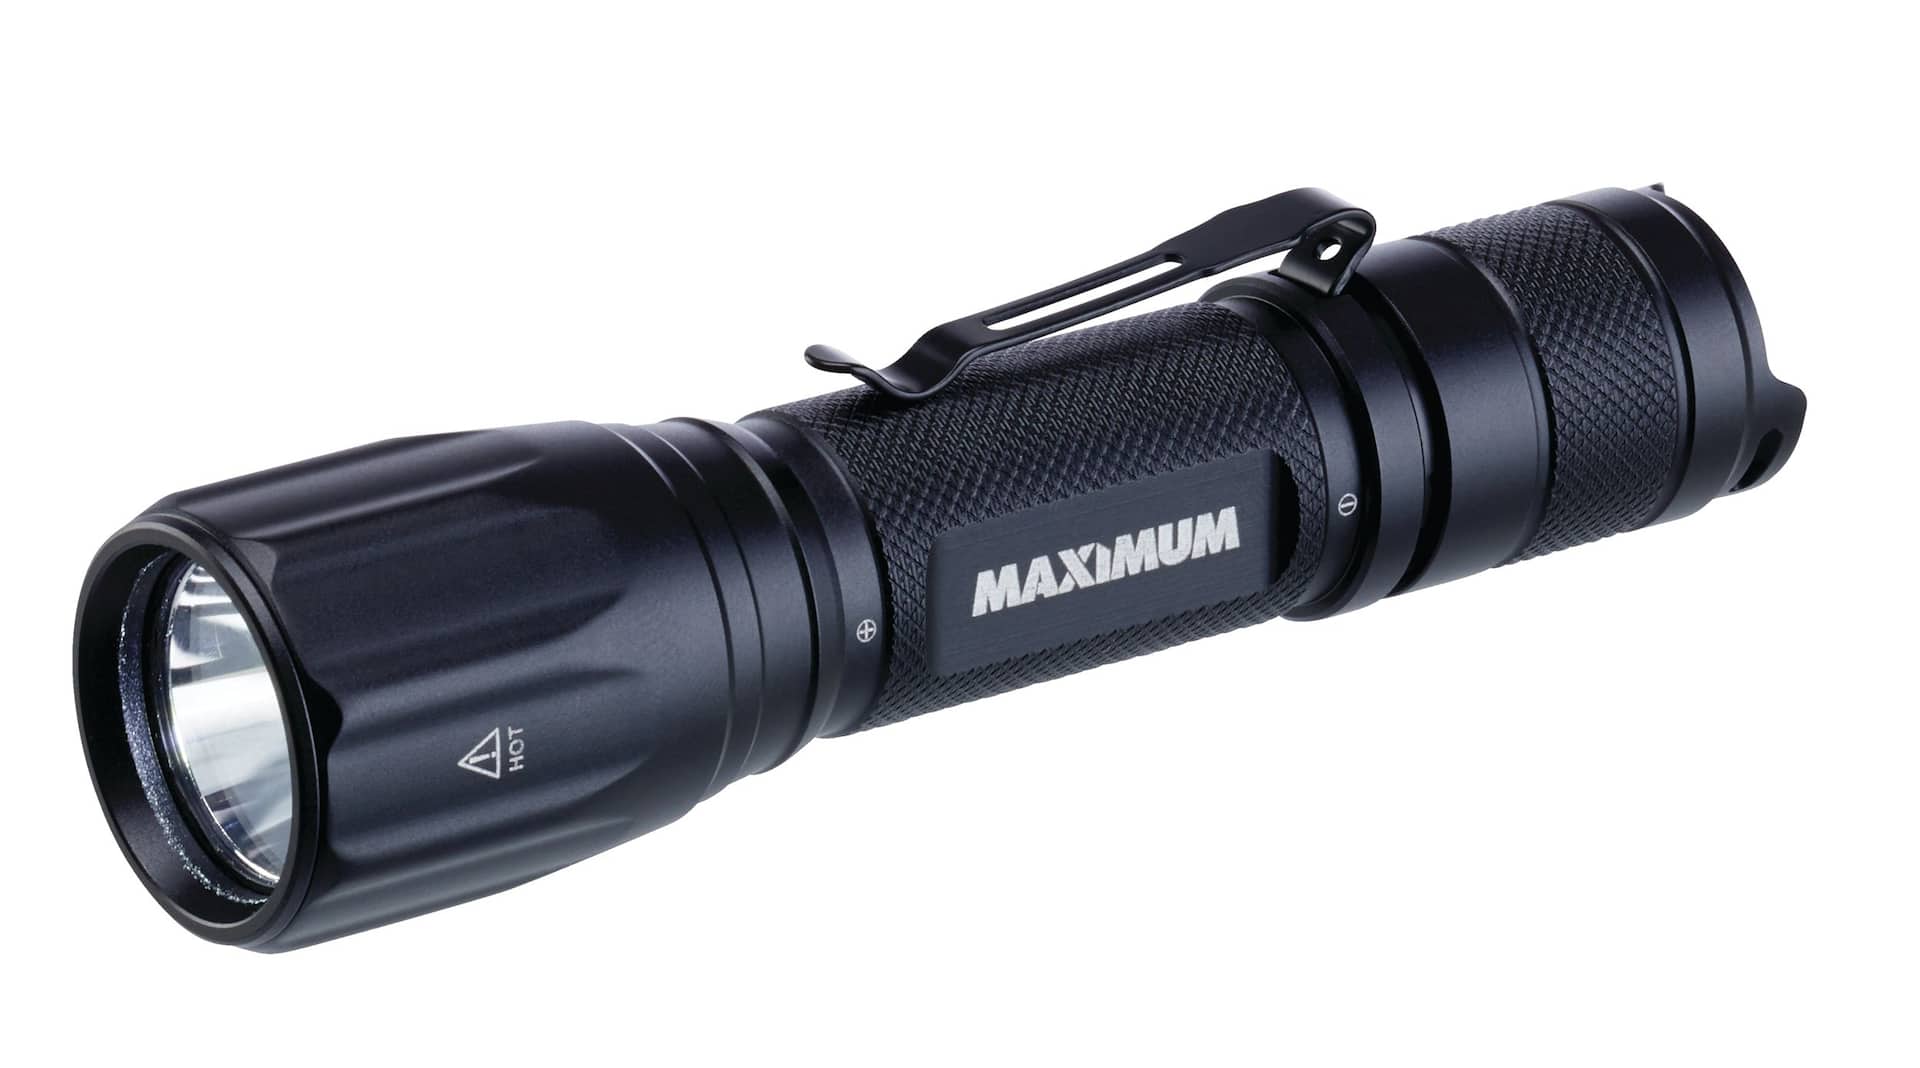 MAXIMUM 600 Lumens Waterproof Rechargeable LED Handheld Flashlight, Batteries  Included, Black Canadian Tire